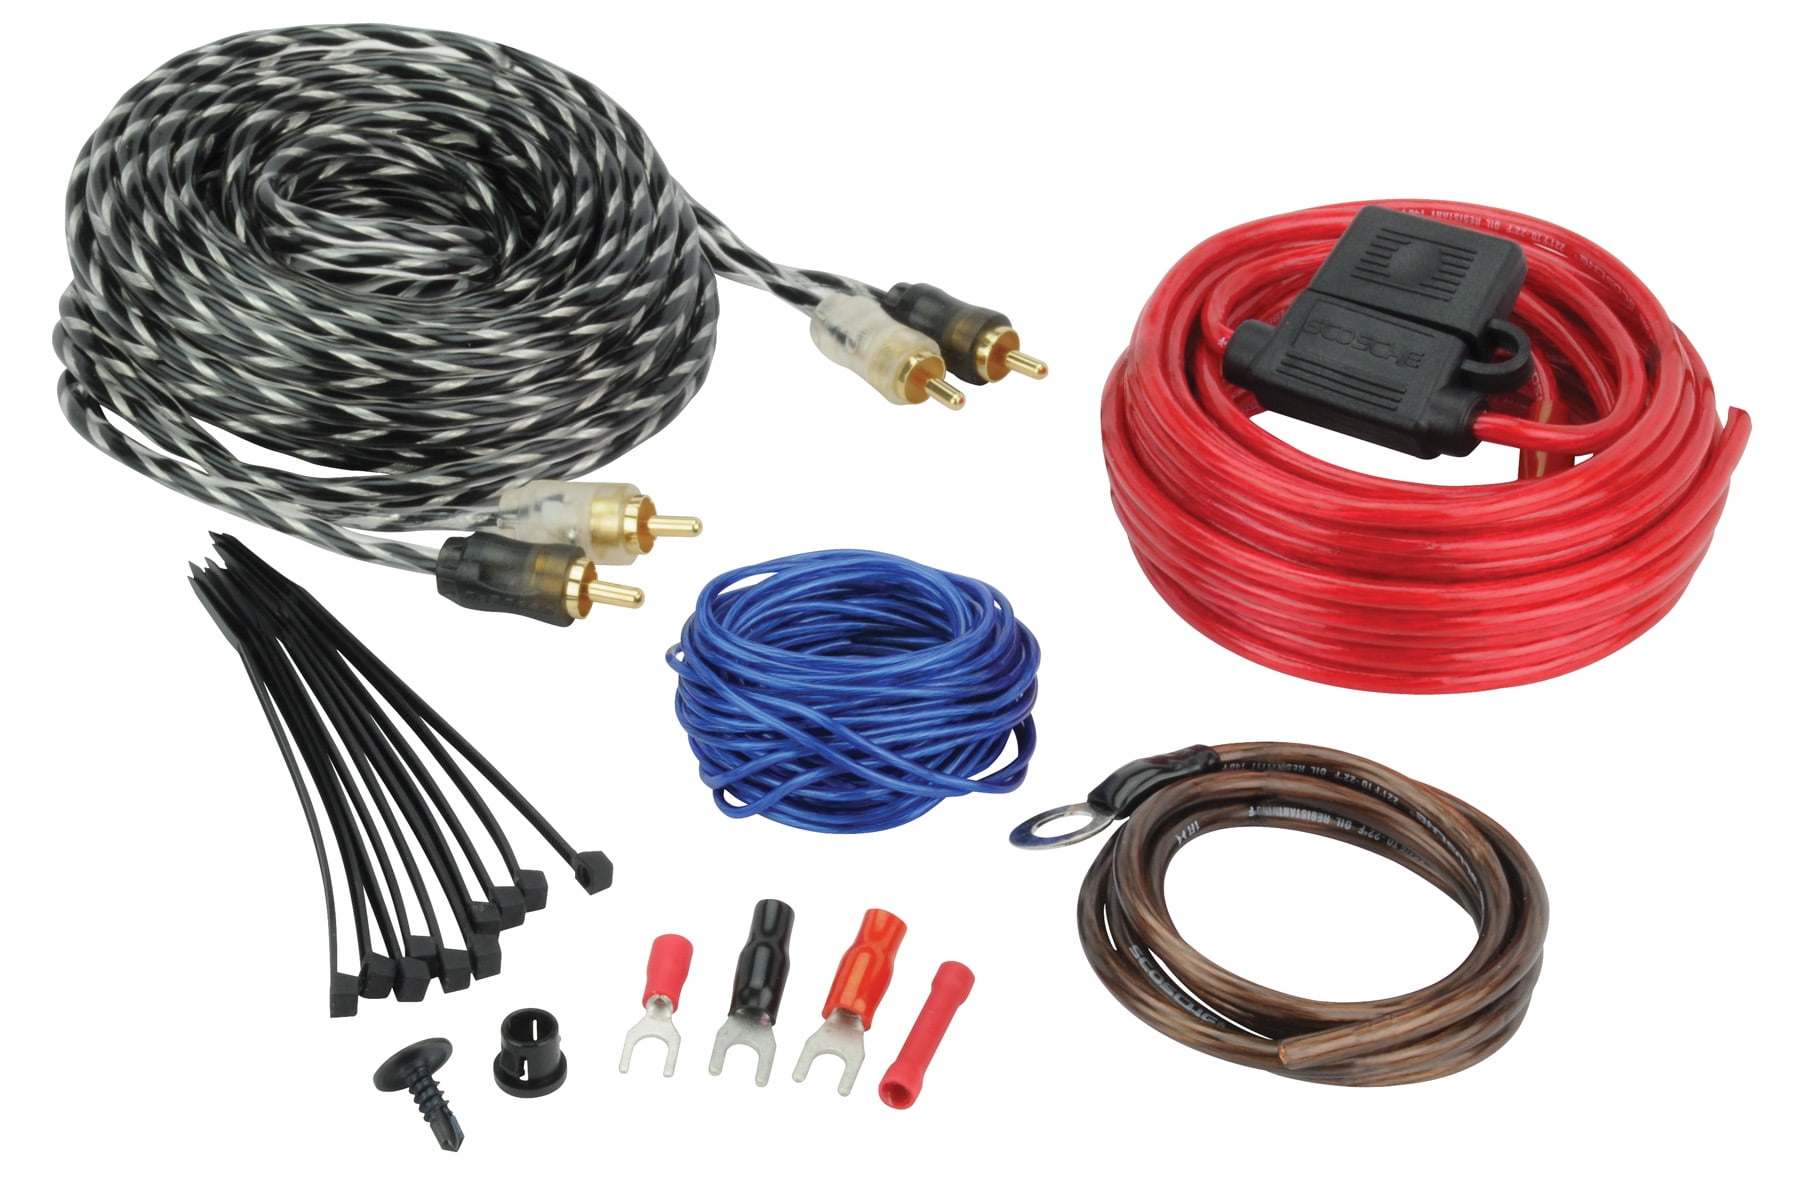 12 Awg Amp Wiring Kit 100 Copper Wire, What Amp Wiring Kit Do I Need